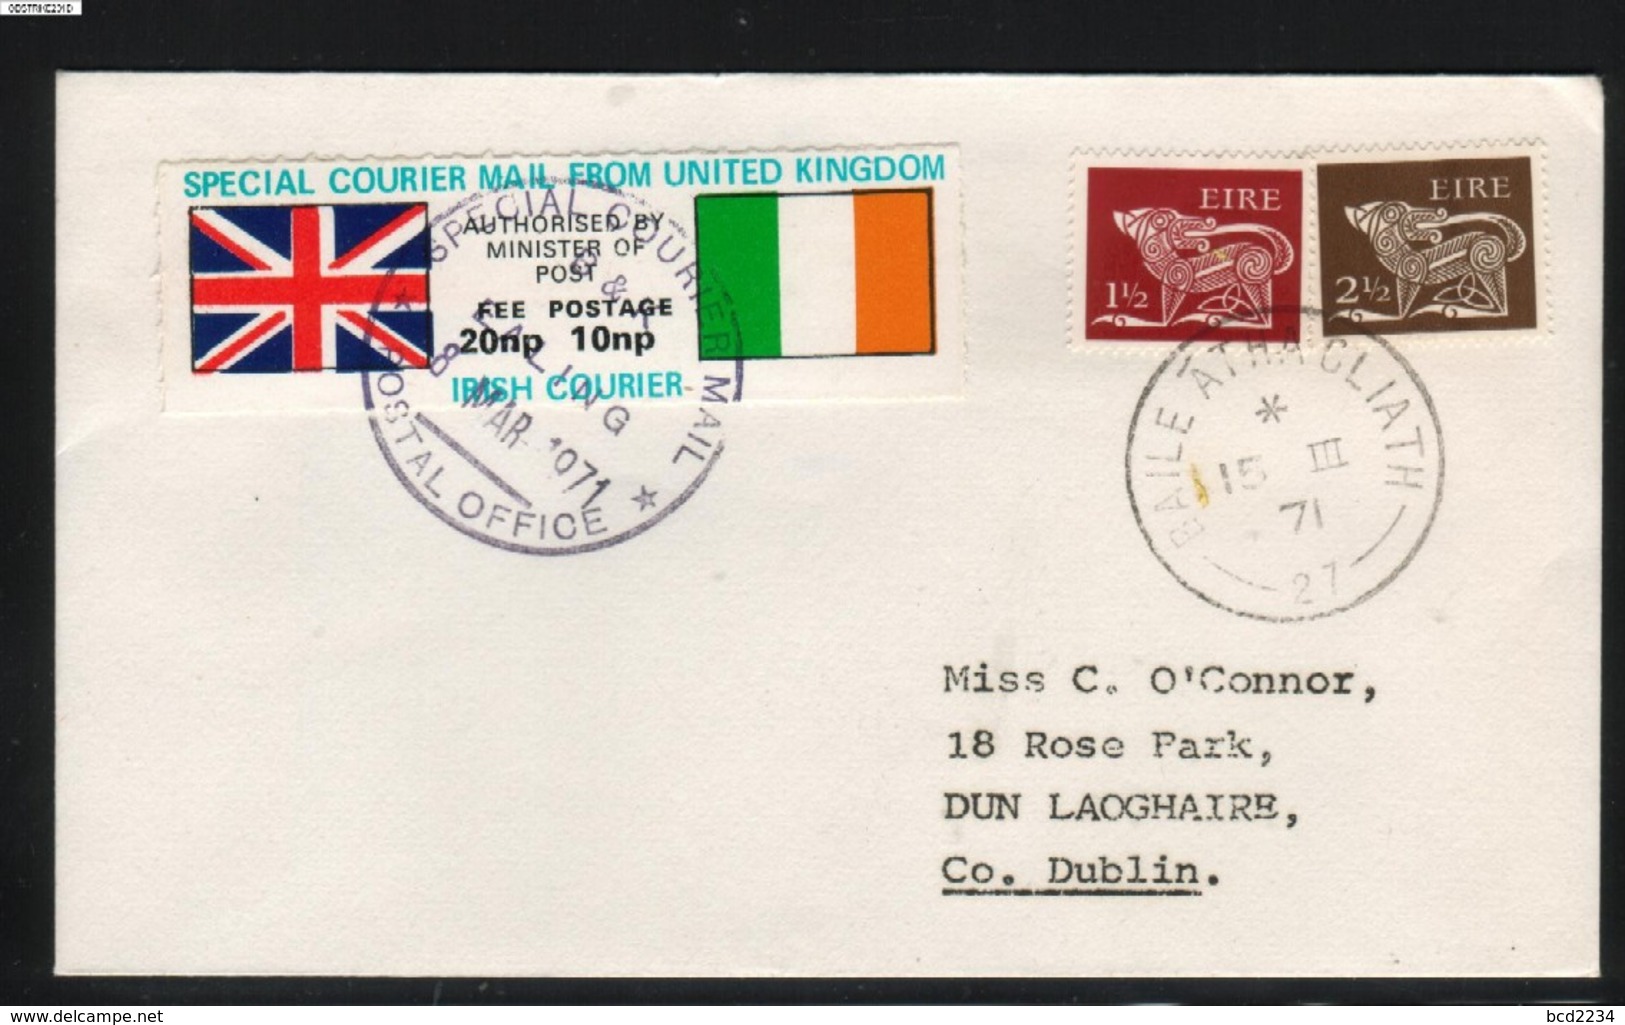 GREAT BRITAIN GB 1971 POSTAL STRIKE MAIL SPECIAL COURIER MAIL 2ND ISSUE DECIMAL COVER LONDON TO IRELAND EIRE 8 MARCH - Cinderella